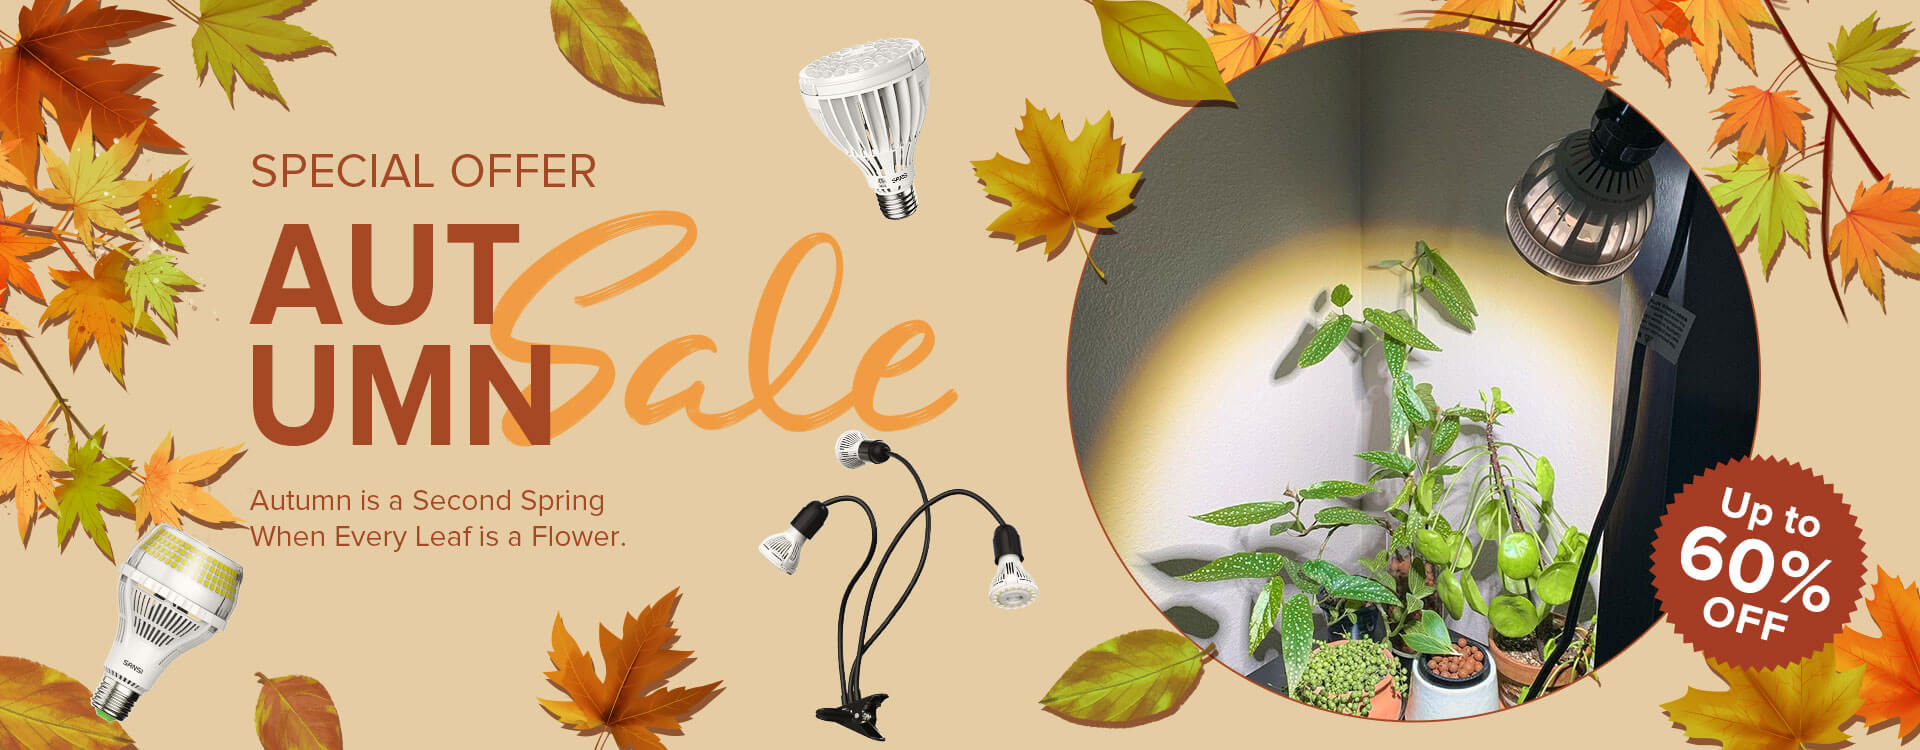 Special Offer Autumn Sale,Up To 60% OFF.